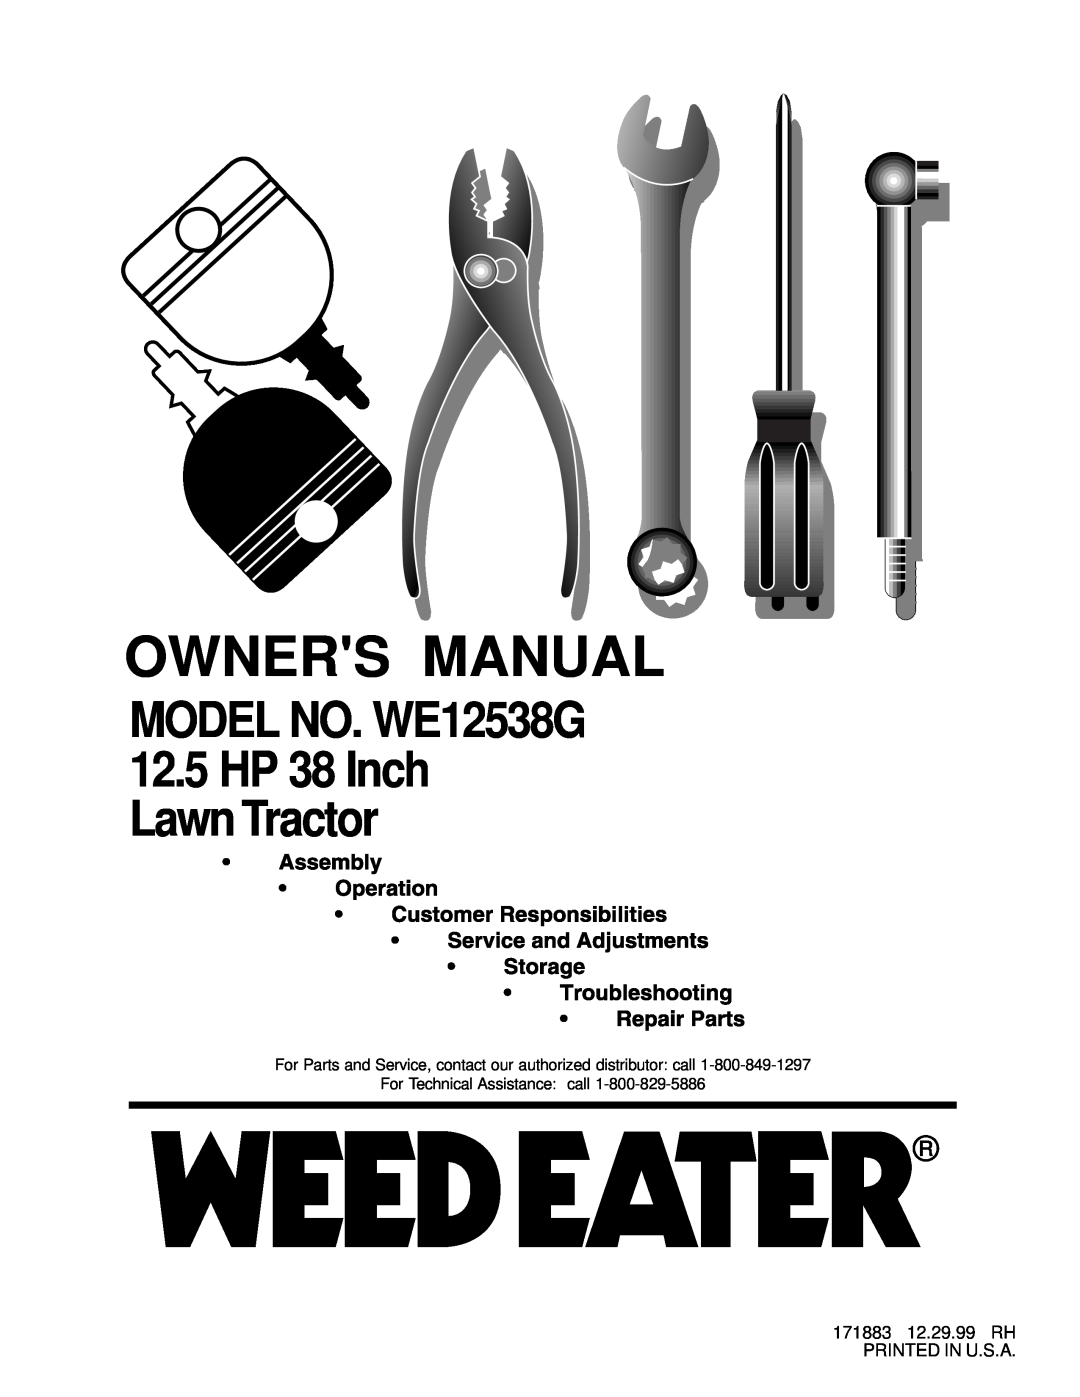 Weed Eater 171883 manual Owners Manual, MODEL NO. WE12538G 12.5 HP 38 Inch Lawn Tractor 